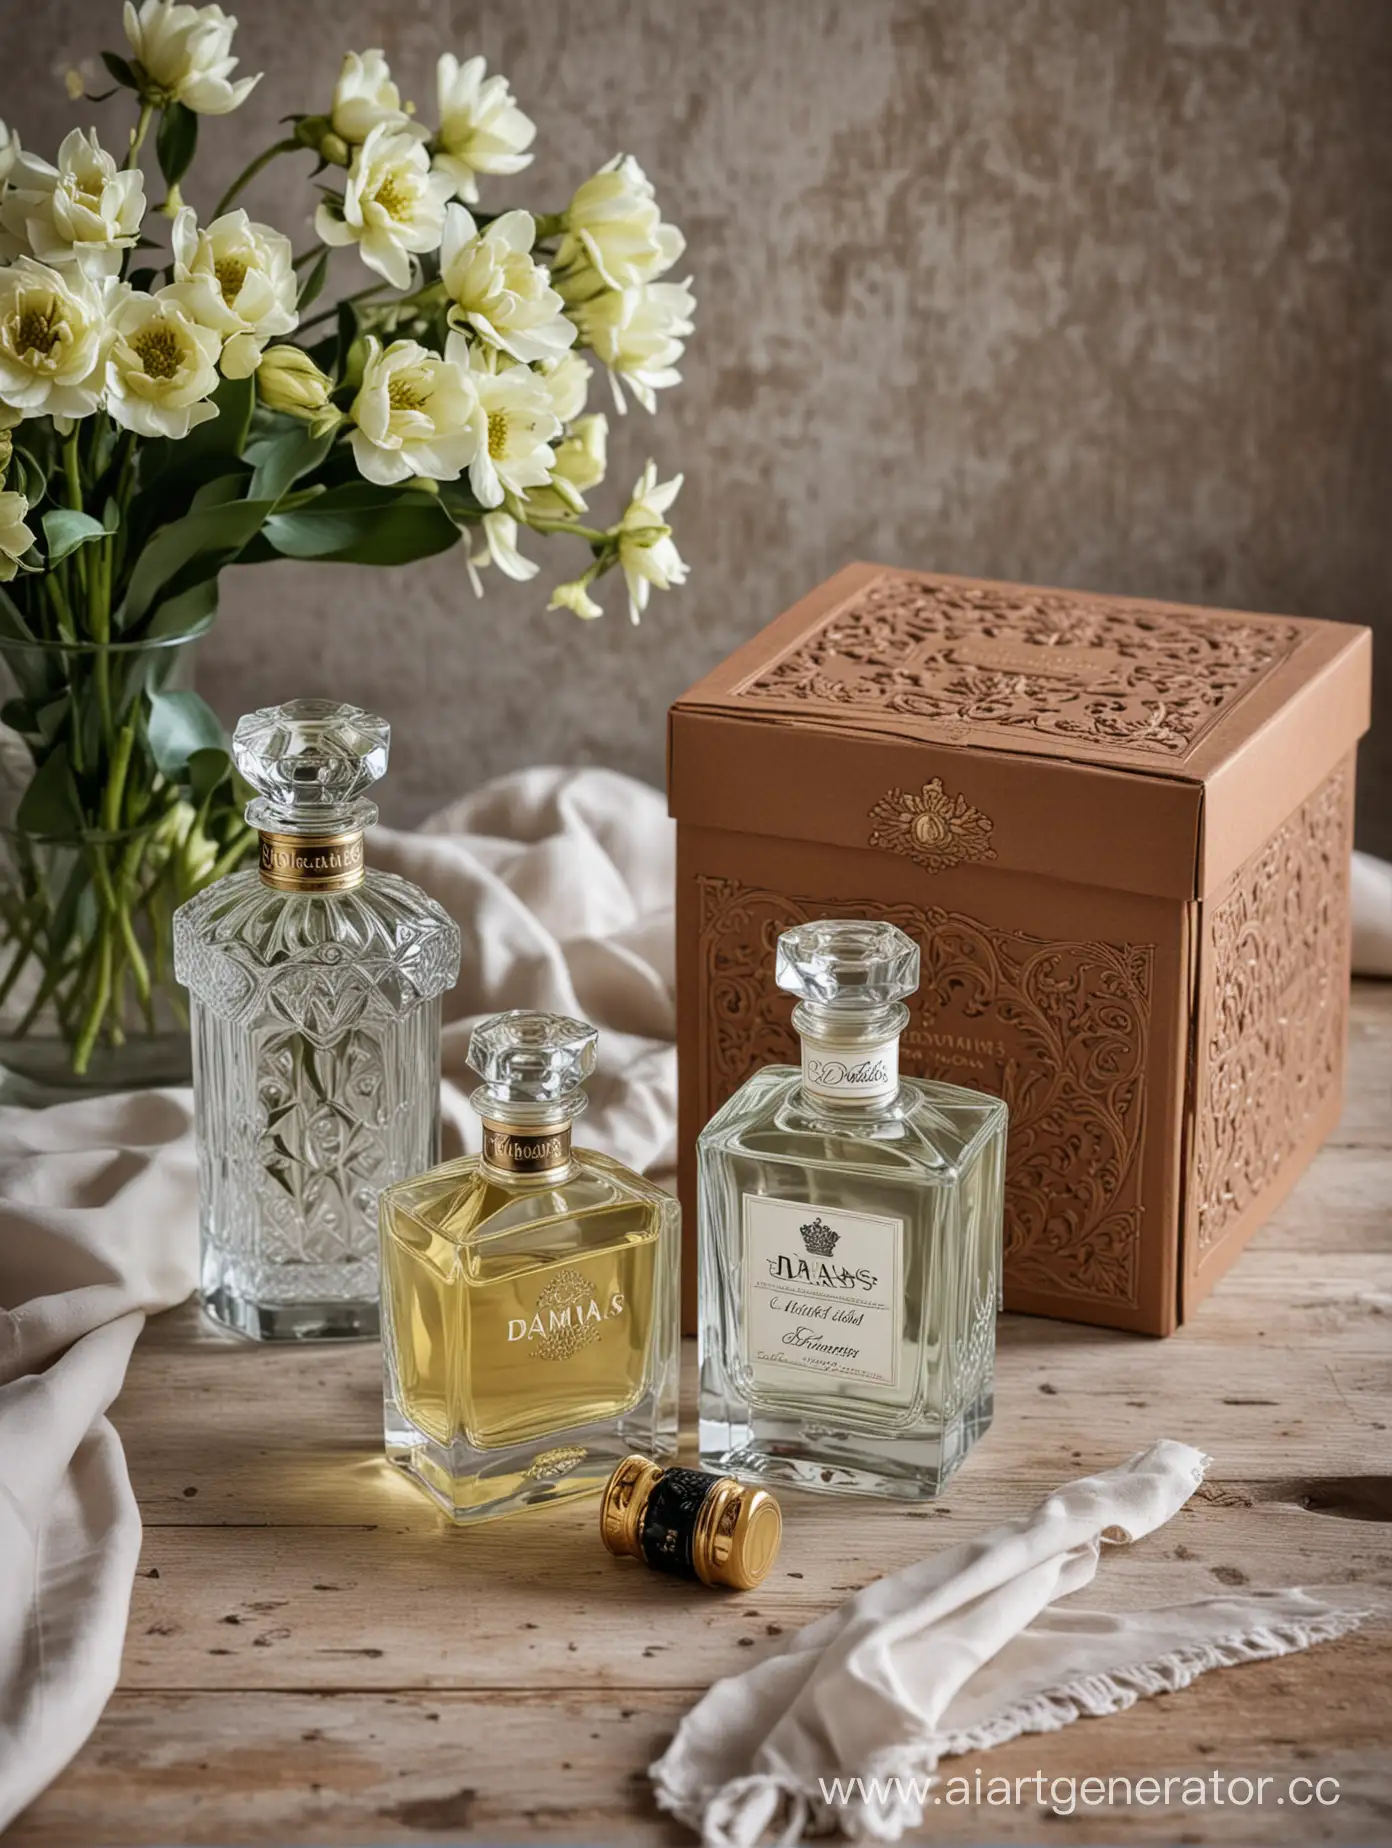 Flemish-Baroque-Painting-Inspired-Still-Life-with-Damas-Cologne-and-Contest-Winning-Box